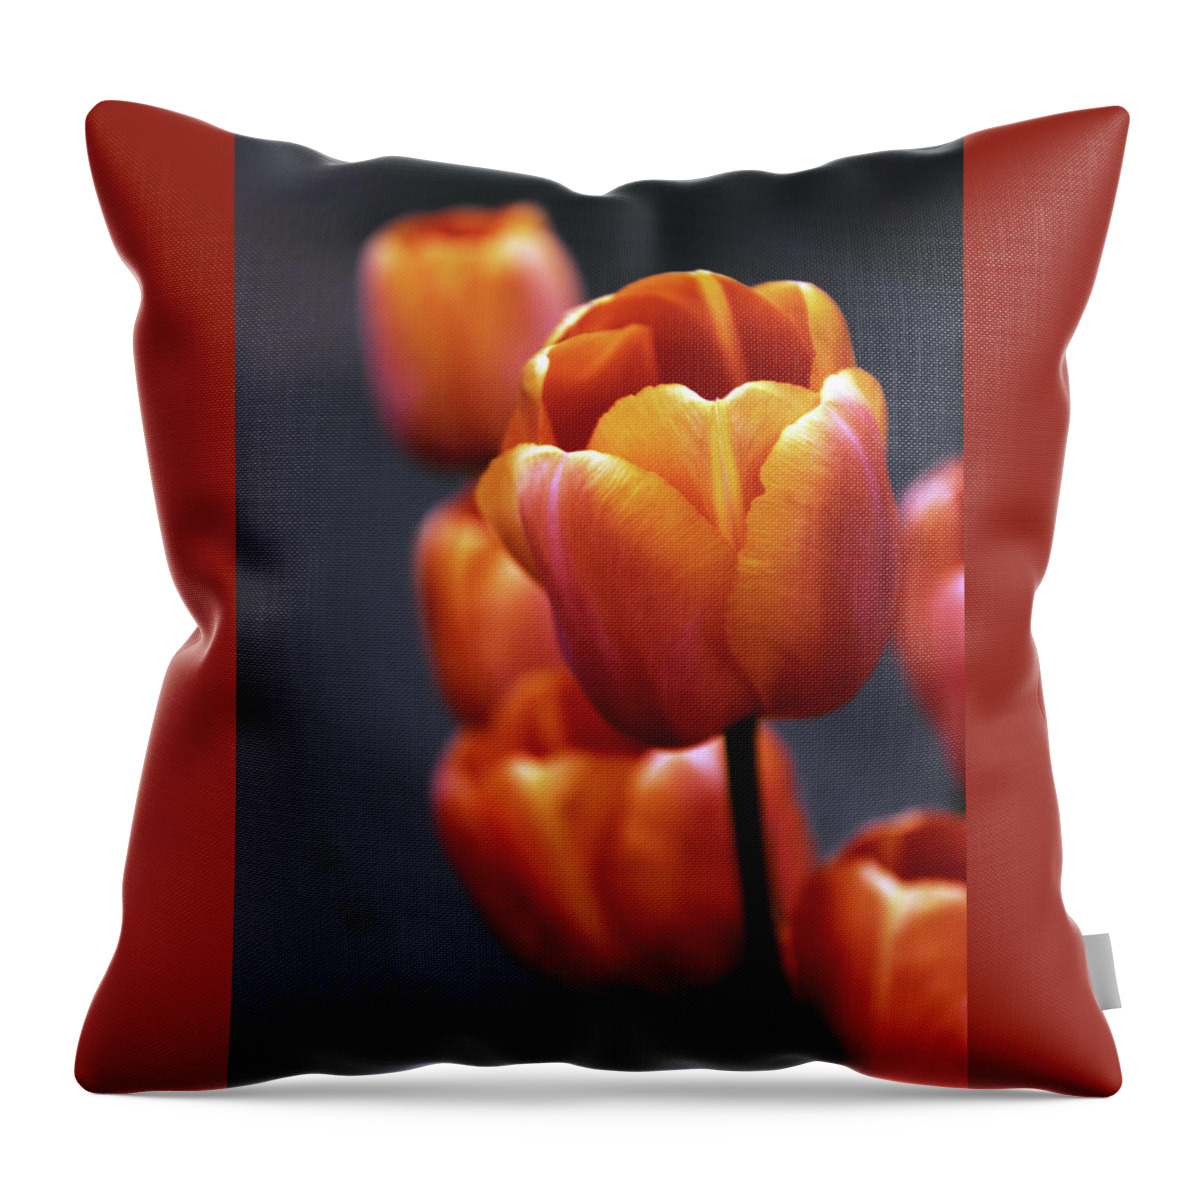 Tulips Throw Pillow featuring the photograph Tulips Aglow by Jessica Jenney